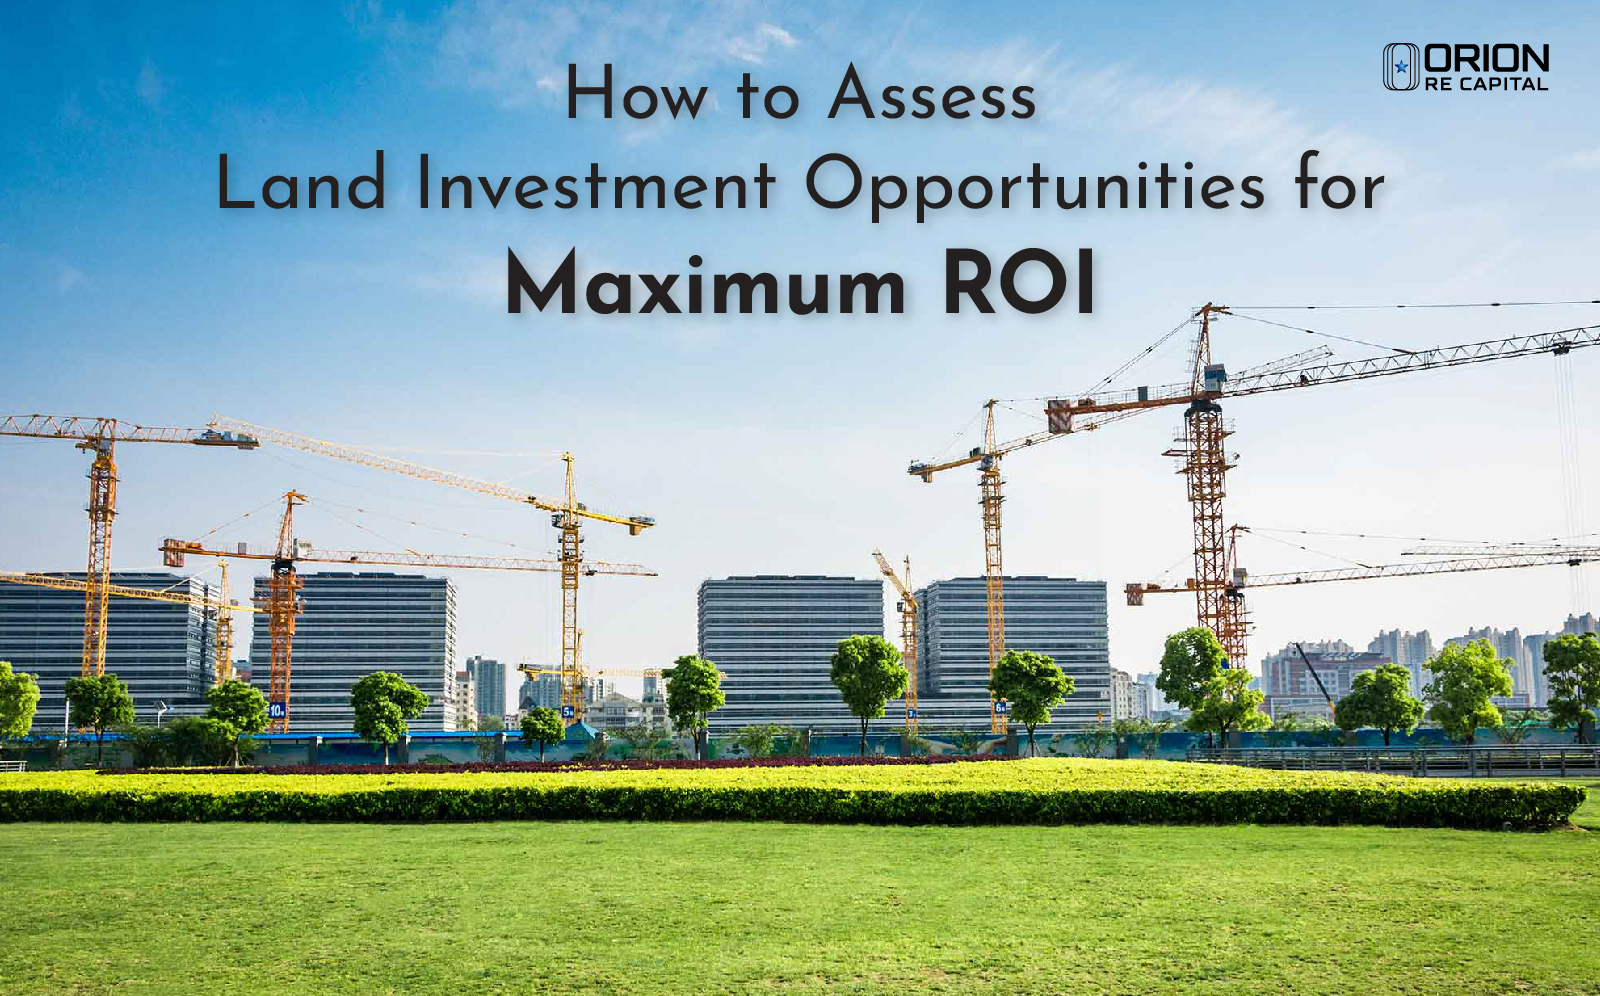 How to Assess Land Investment Opportunities for Maximum ROI